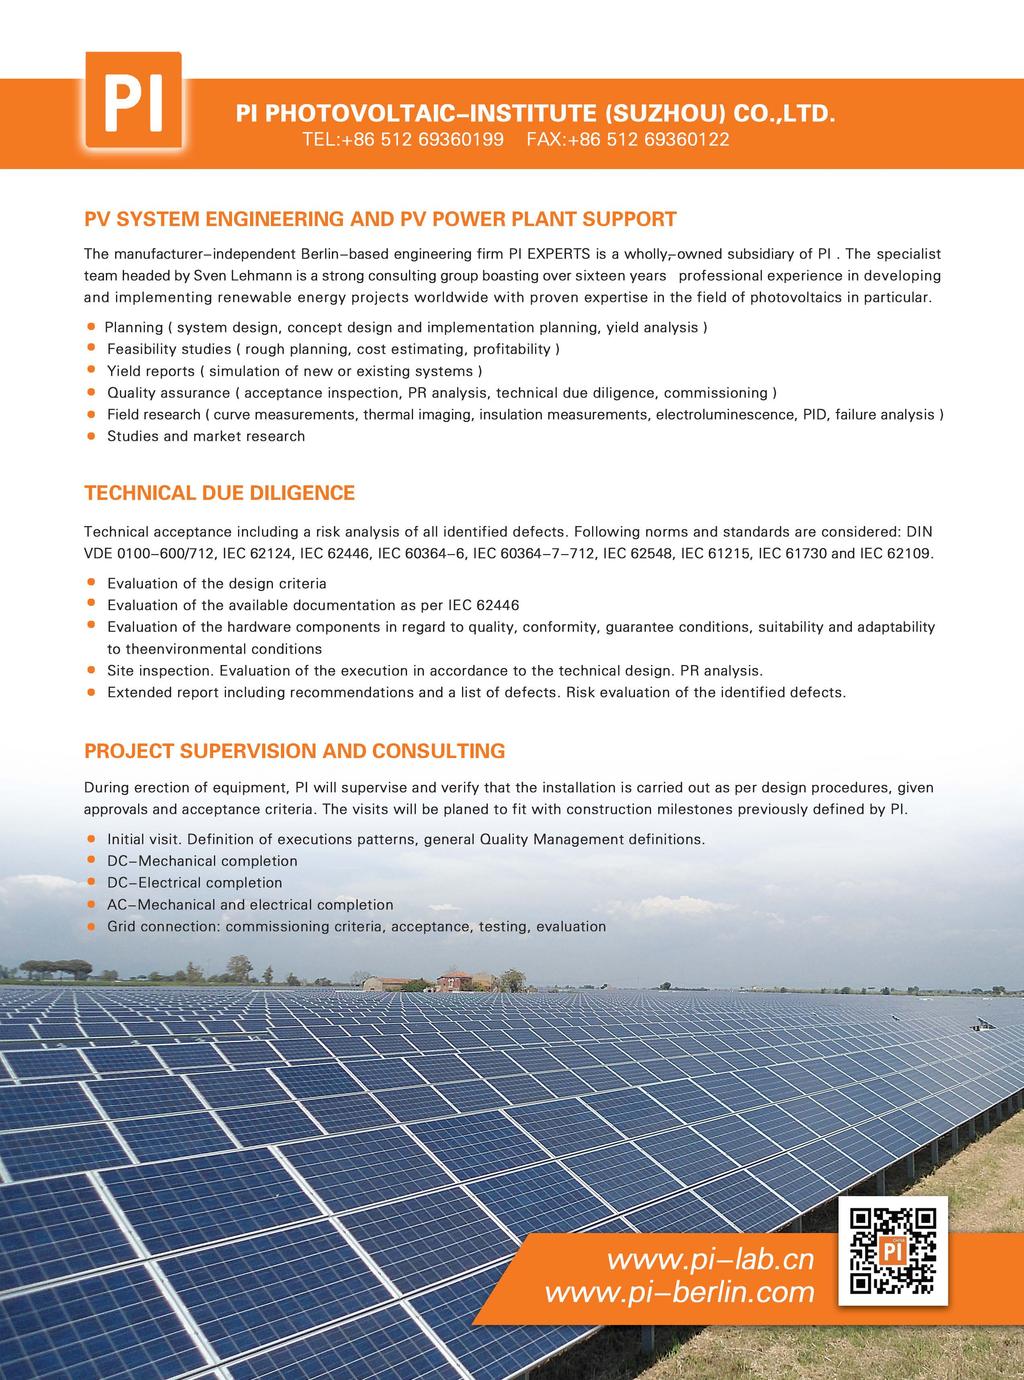 PV SYSTEM ENGINEERING AND PV POWER PLANT SUPPORT The manufacturer-independent Berlin-based engineering firm PI EXPERTS is a wholly;-owned subsidiary of PI.